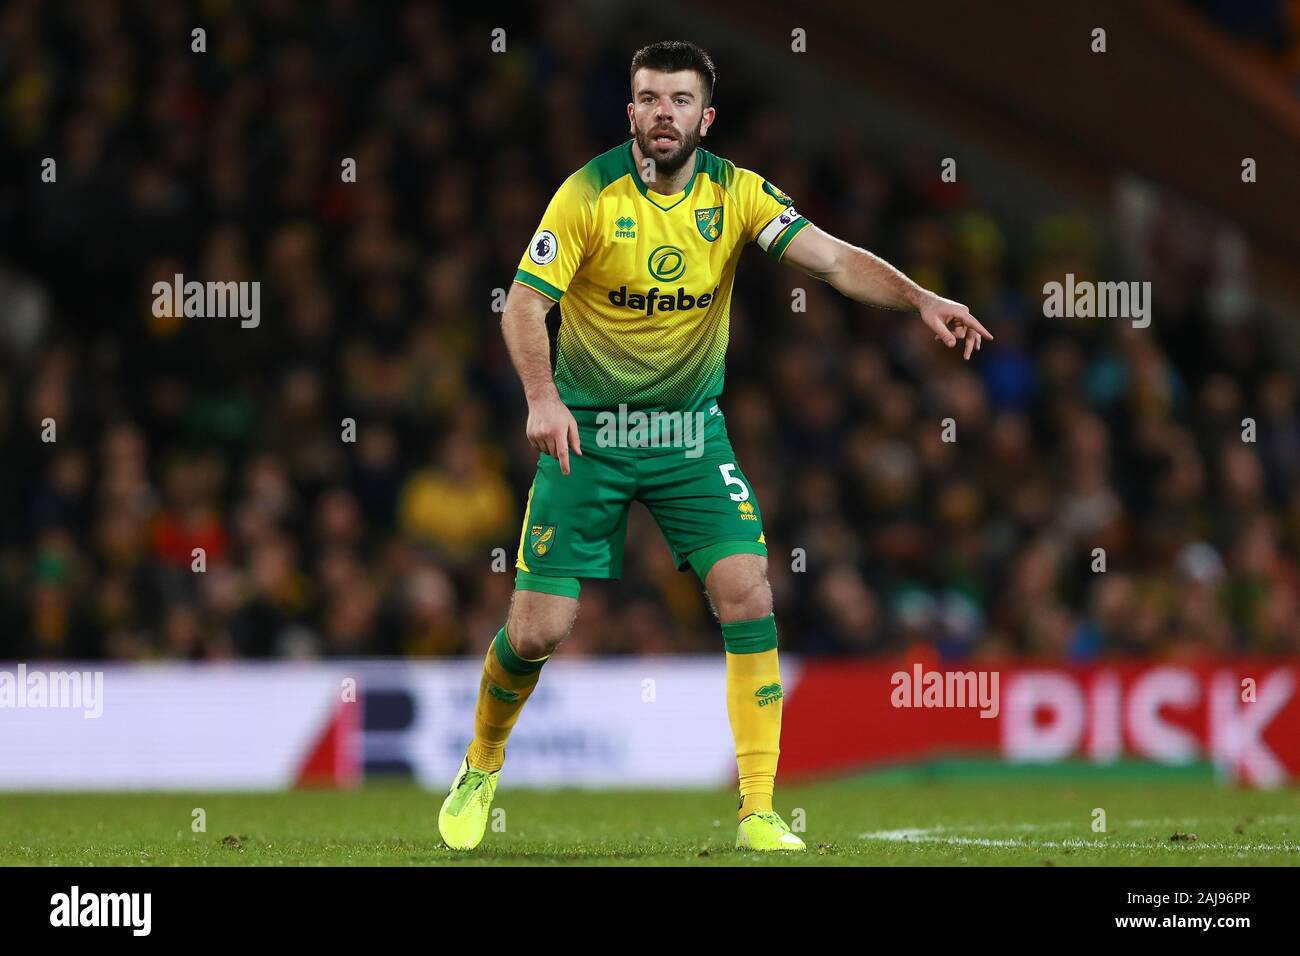 Grant Hanley of Norwich City in action during the Premier League match between Norwich City and Wolverhampton Wanderers at Carrow Road Staduim in Norwich.Final Score; Norwich City 1:2 Wolverhampton Wanderers. Stock Photo